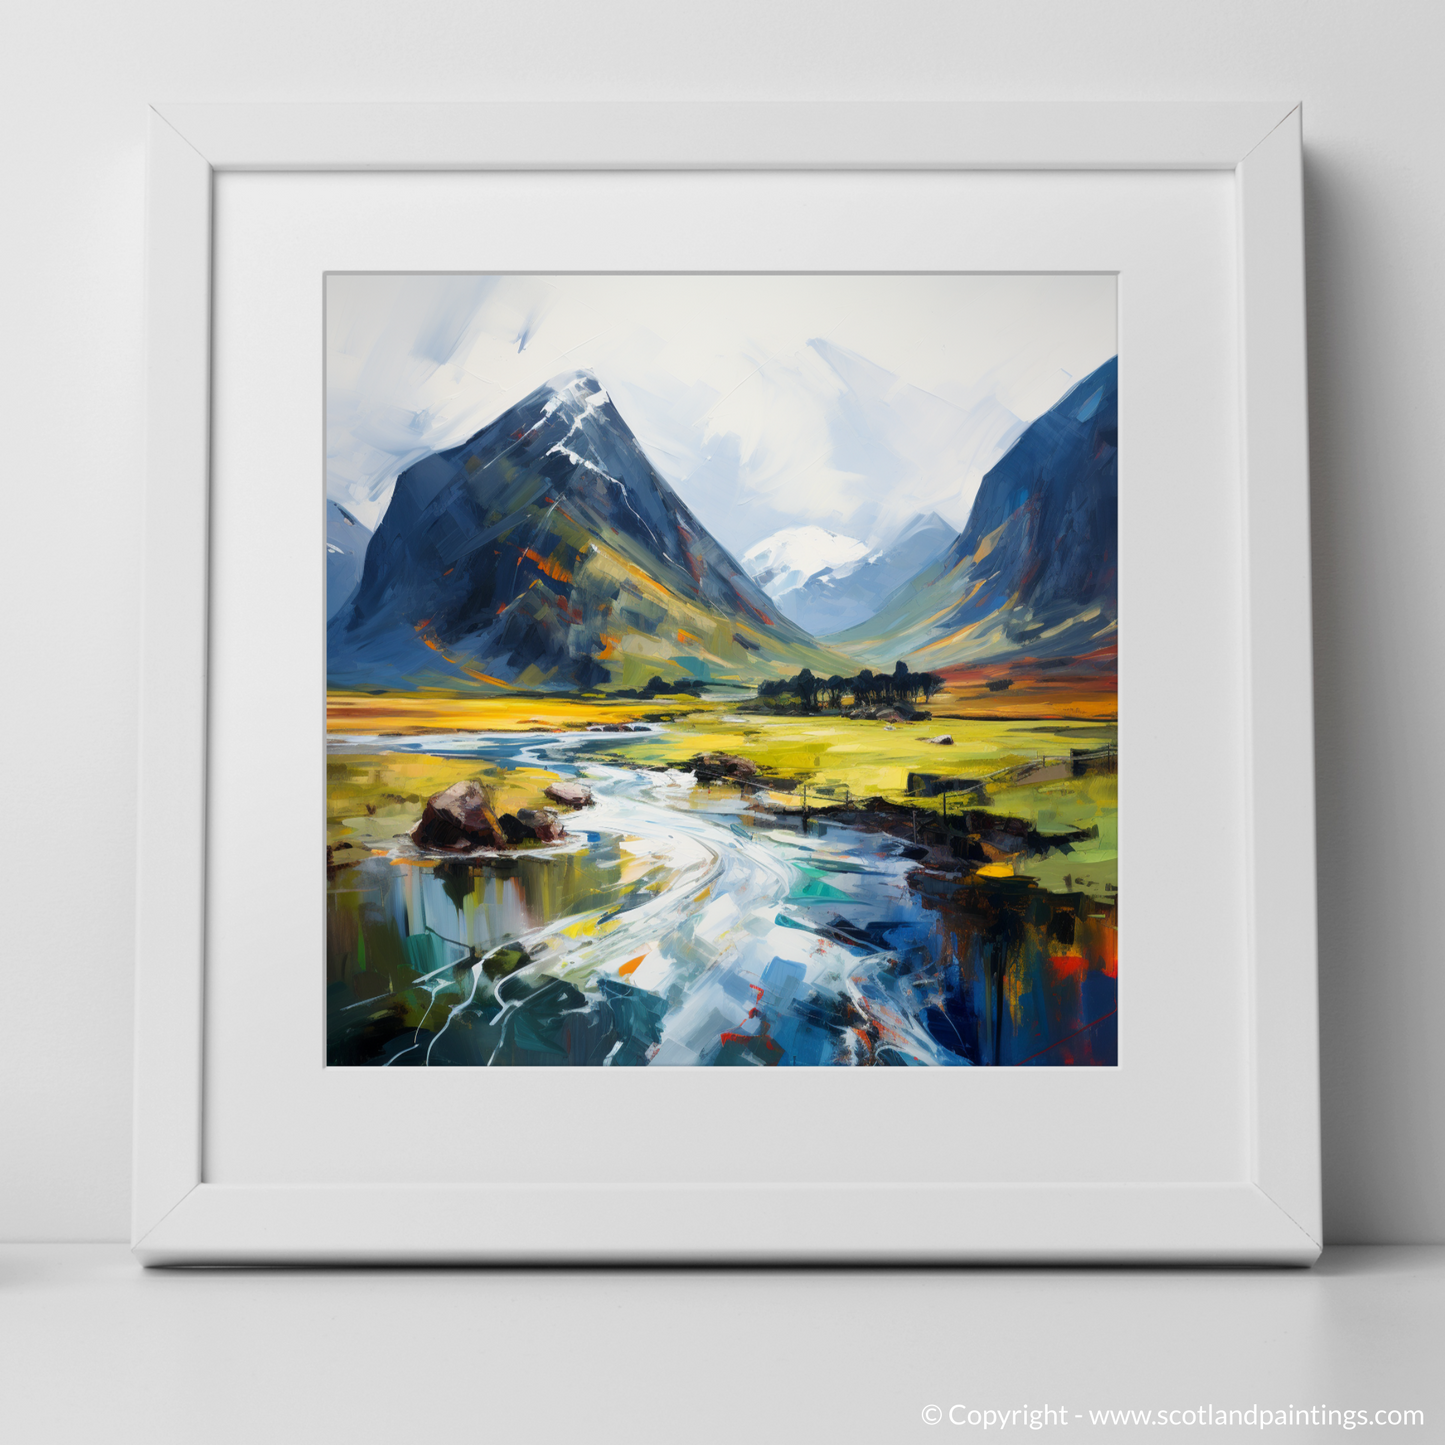 Art Print of Glencoe, Argyll and Bute with a white frame